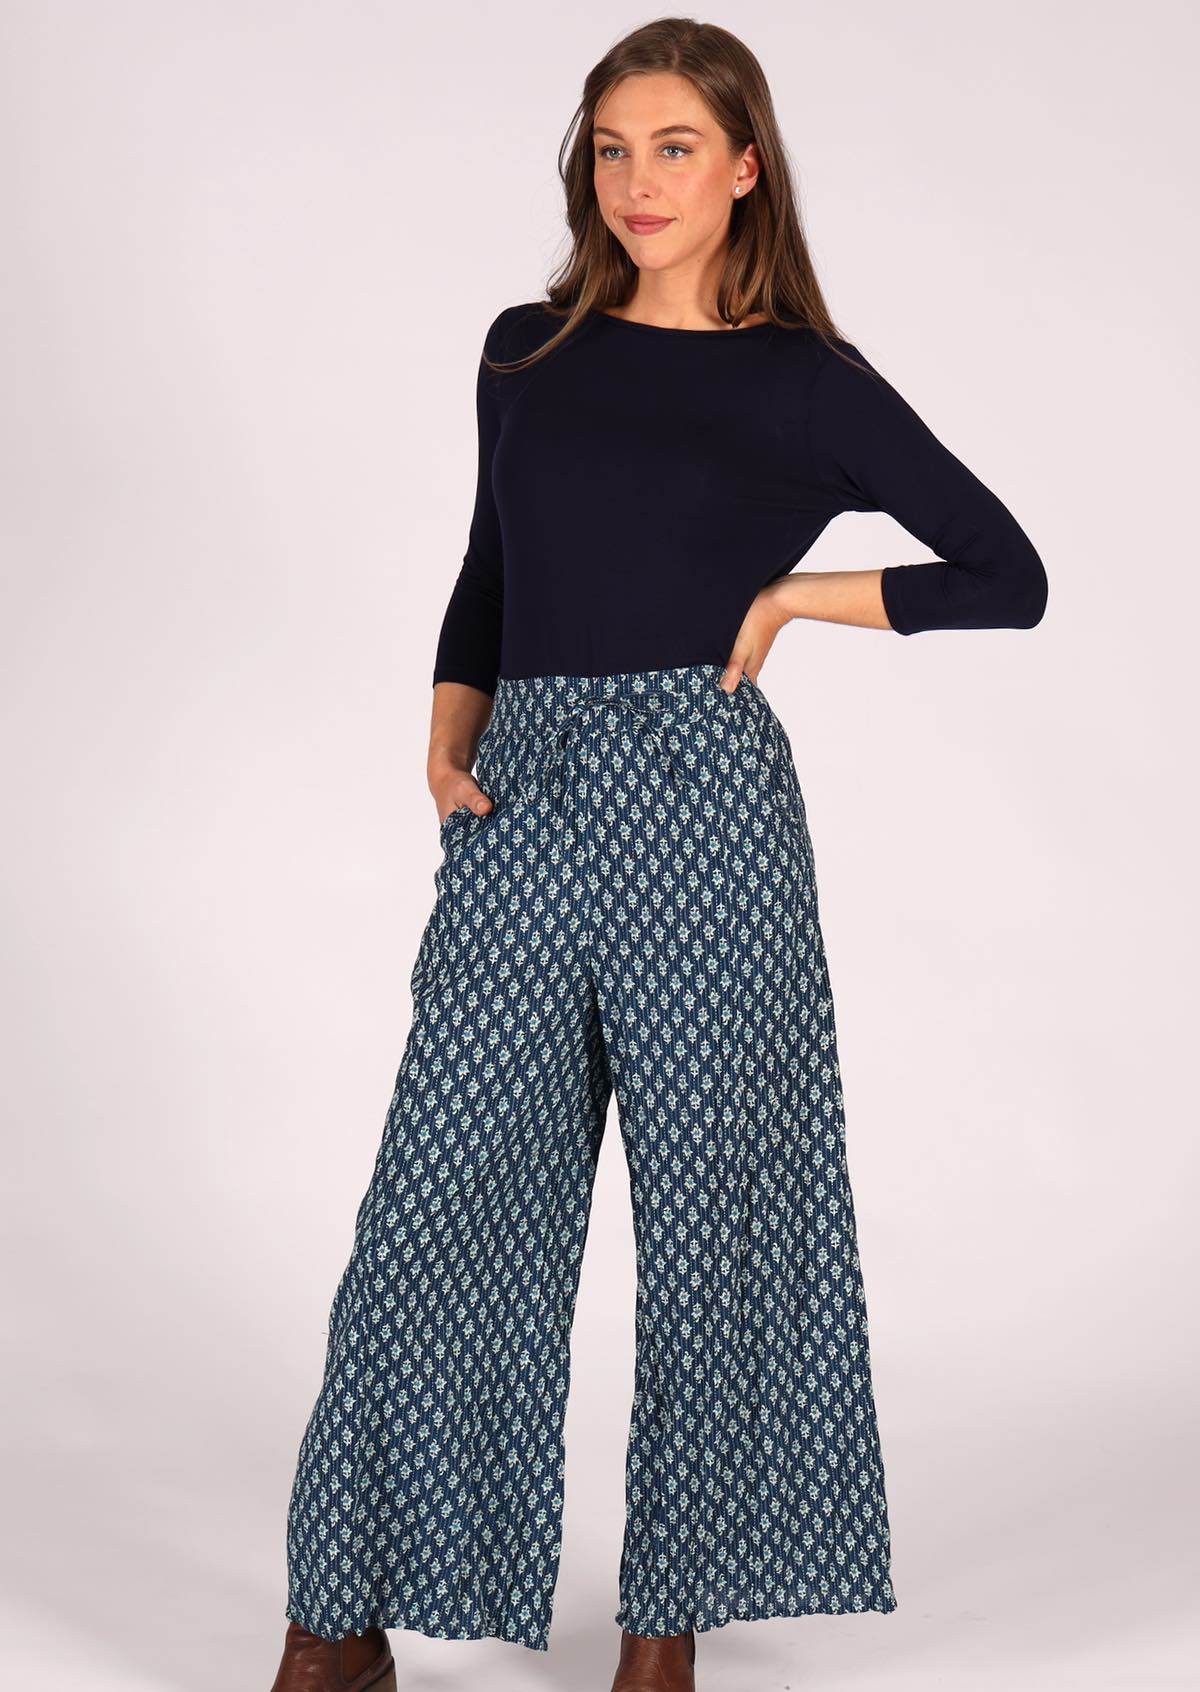 100% cotton floral wide leg pants are styled with a blue top. 